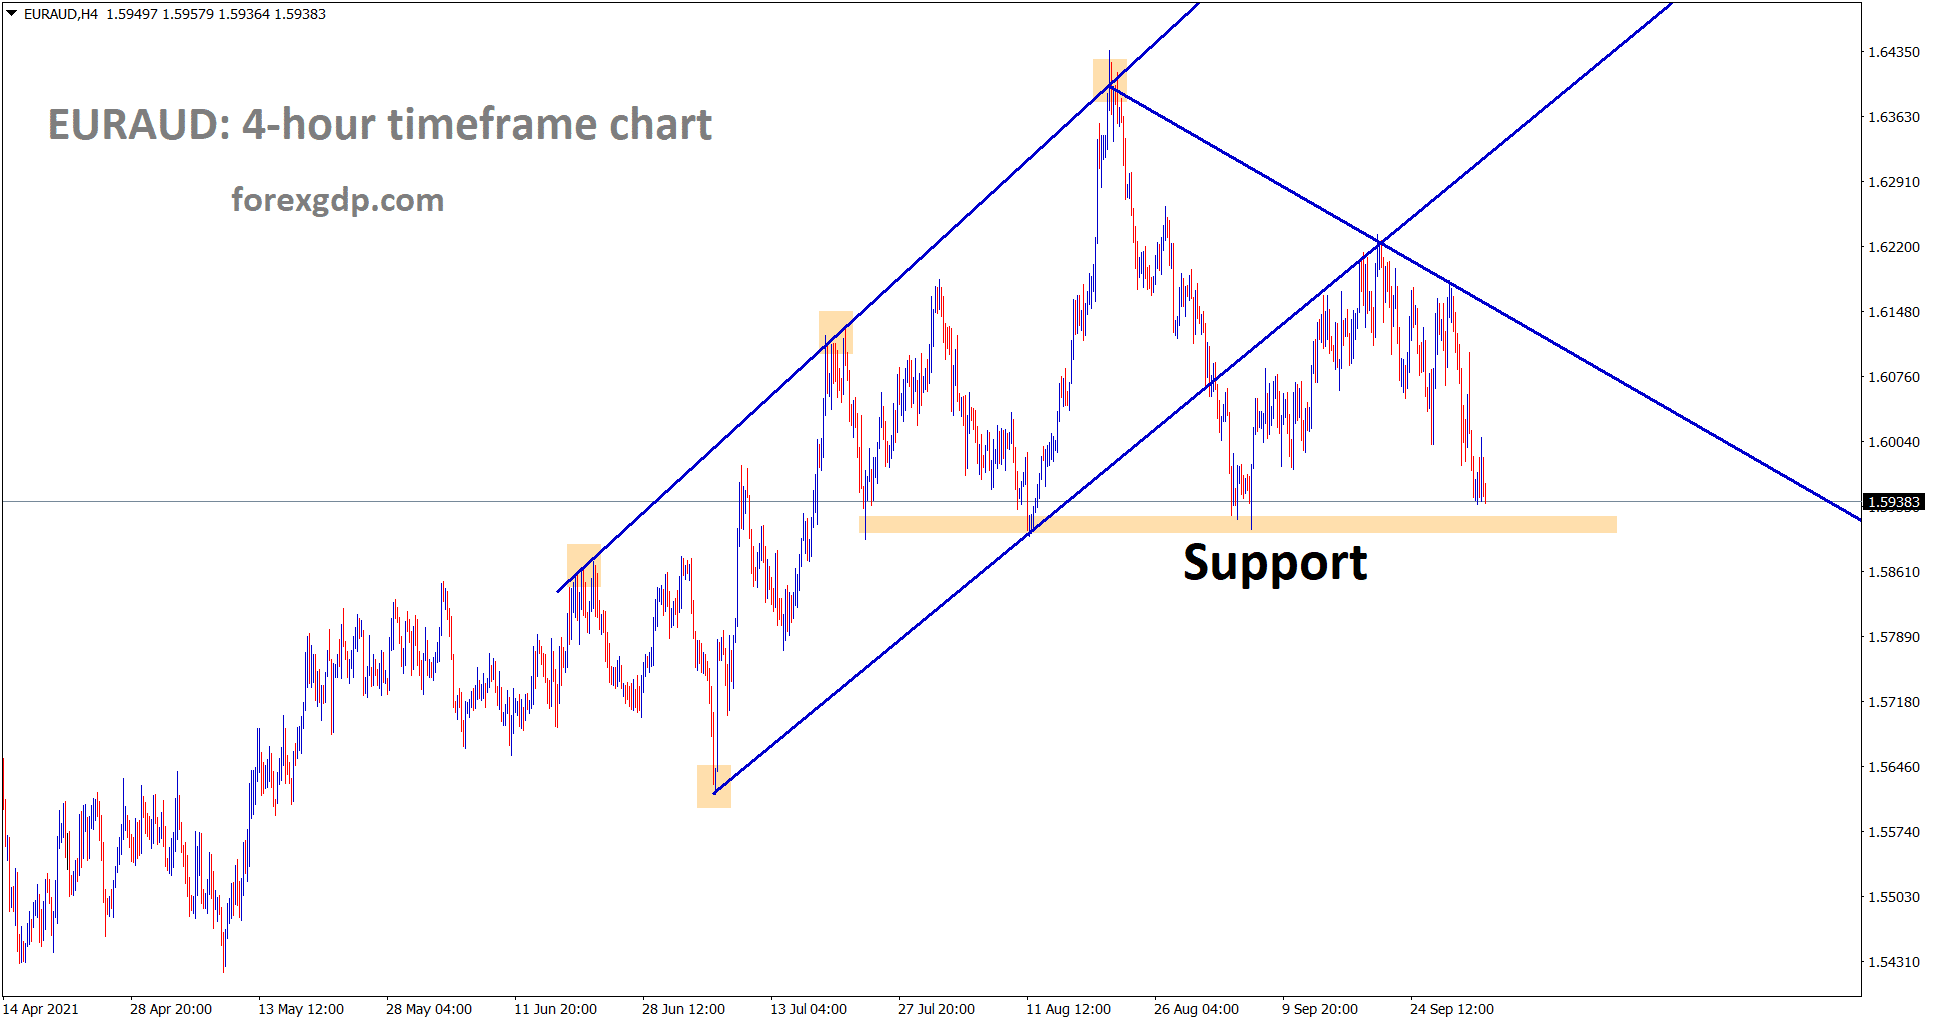 EURAUD is going to reach the horizontal support area wait for breakout or reverssal